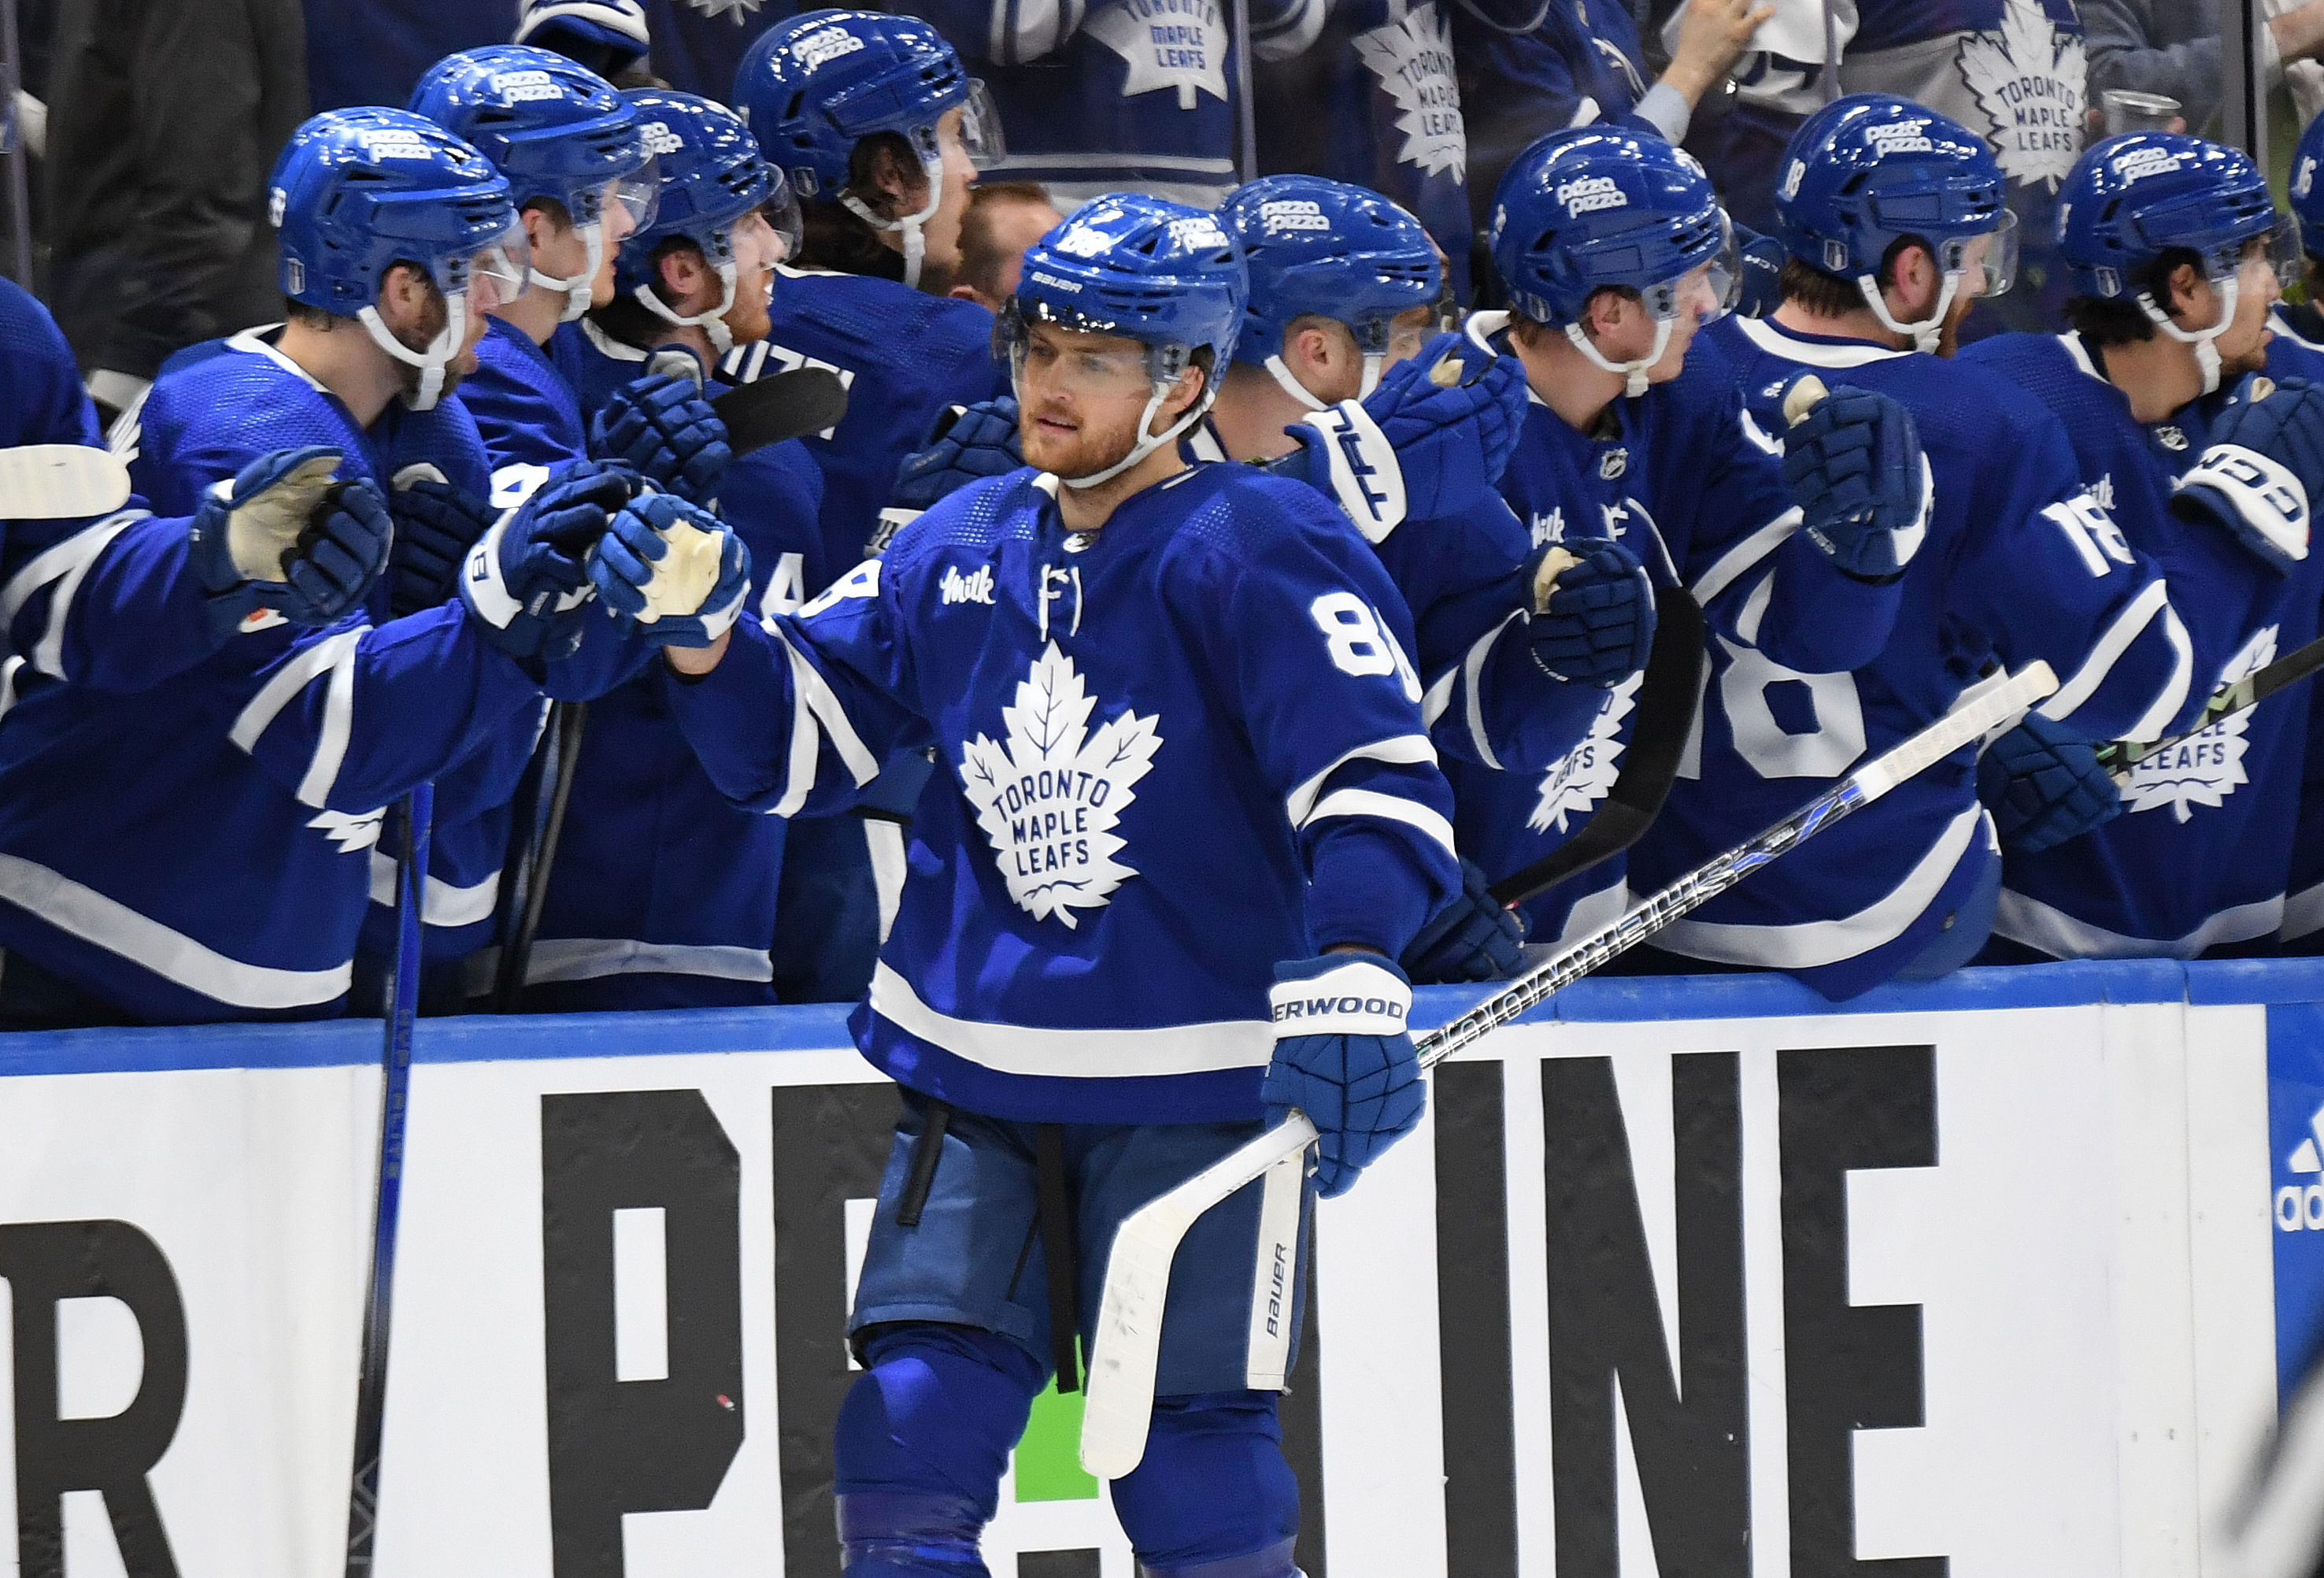 Toronto Maple Leafs vs Boston Bruins Live streaming options, where and